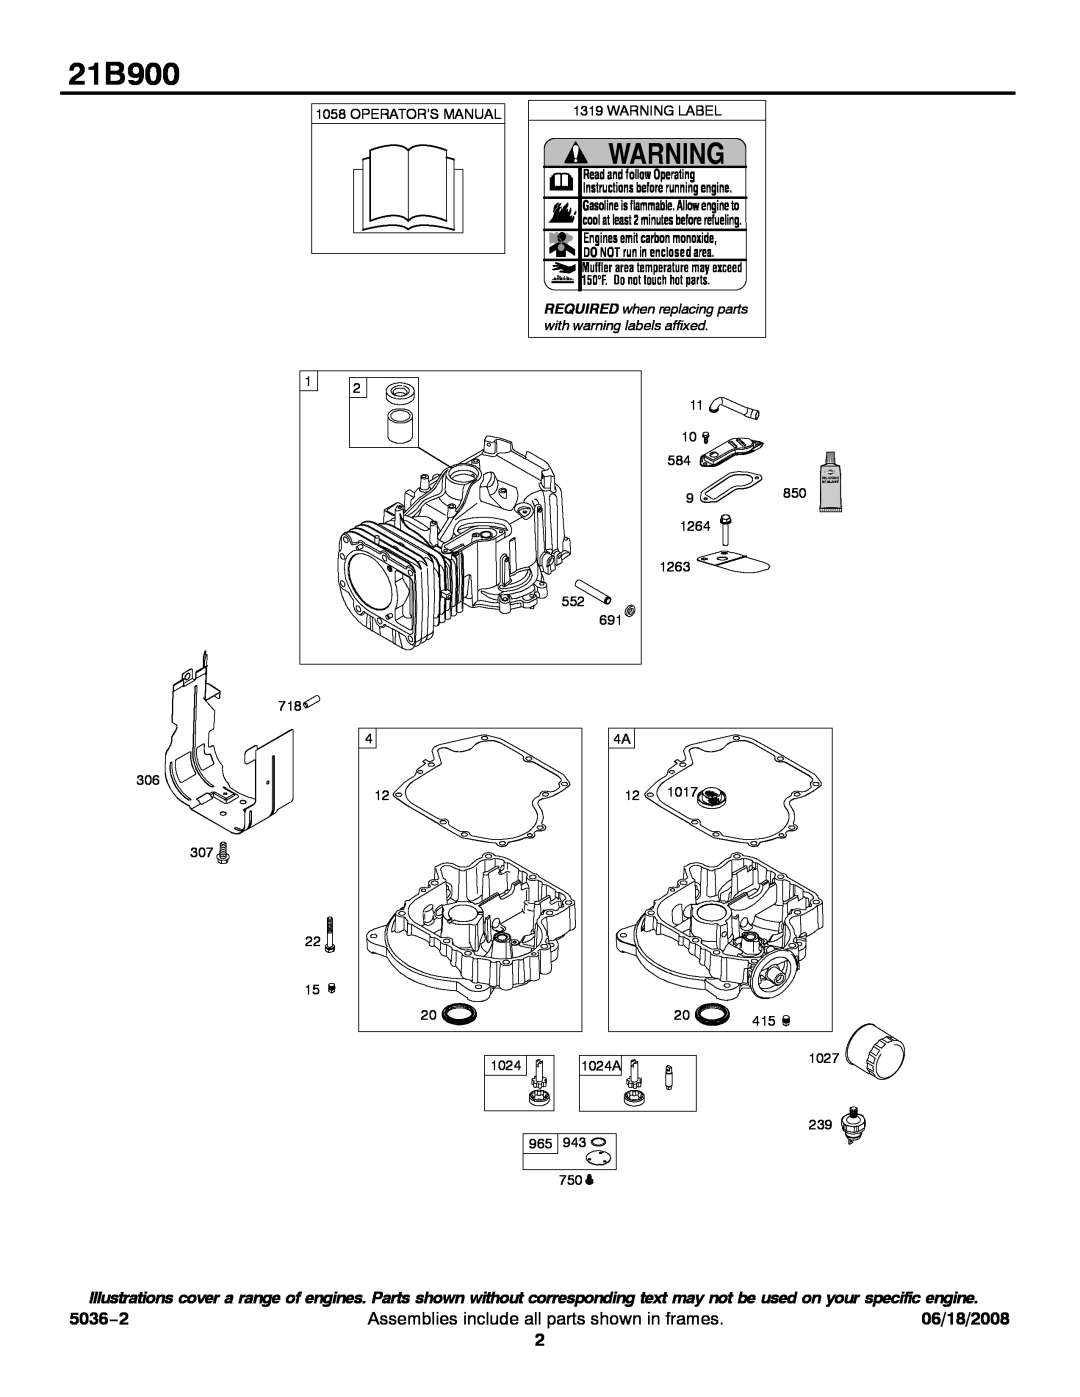 Briggs & Stratton 21B900 service manual 5036−2, Assemblies include all parts shown in frames, 06/18/2008 